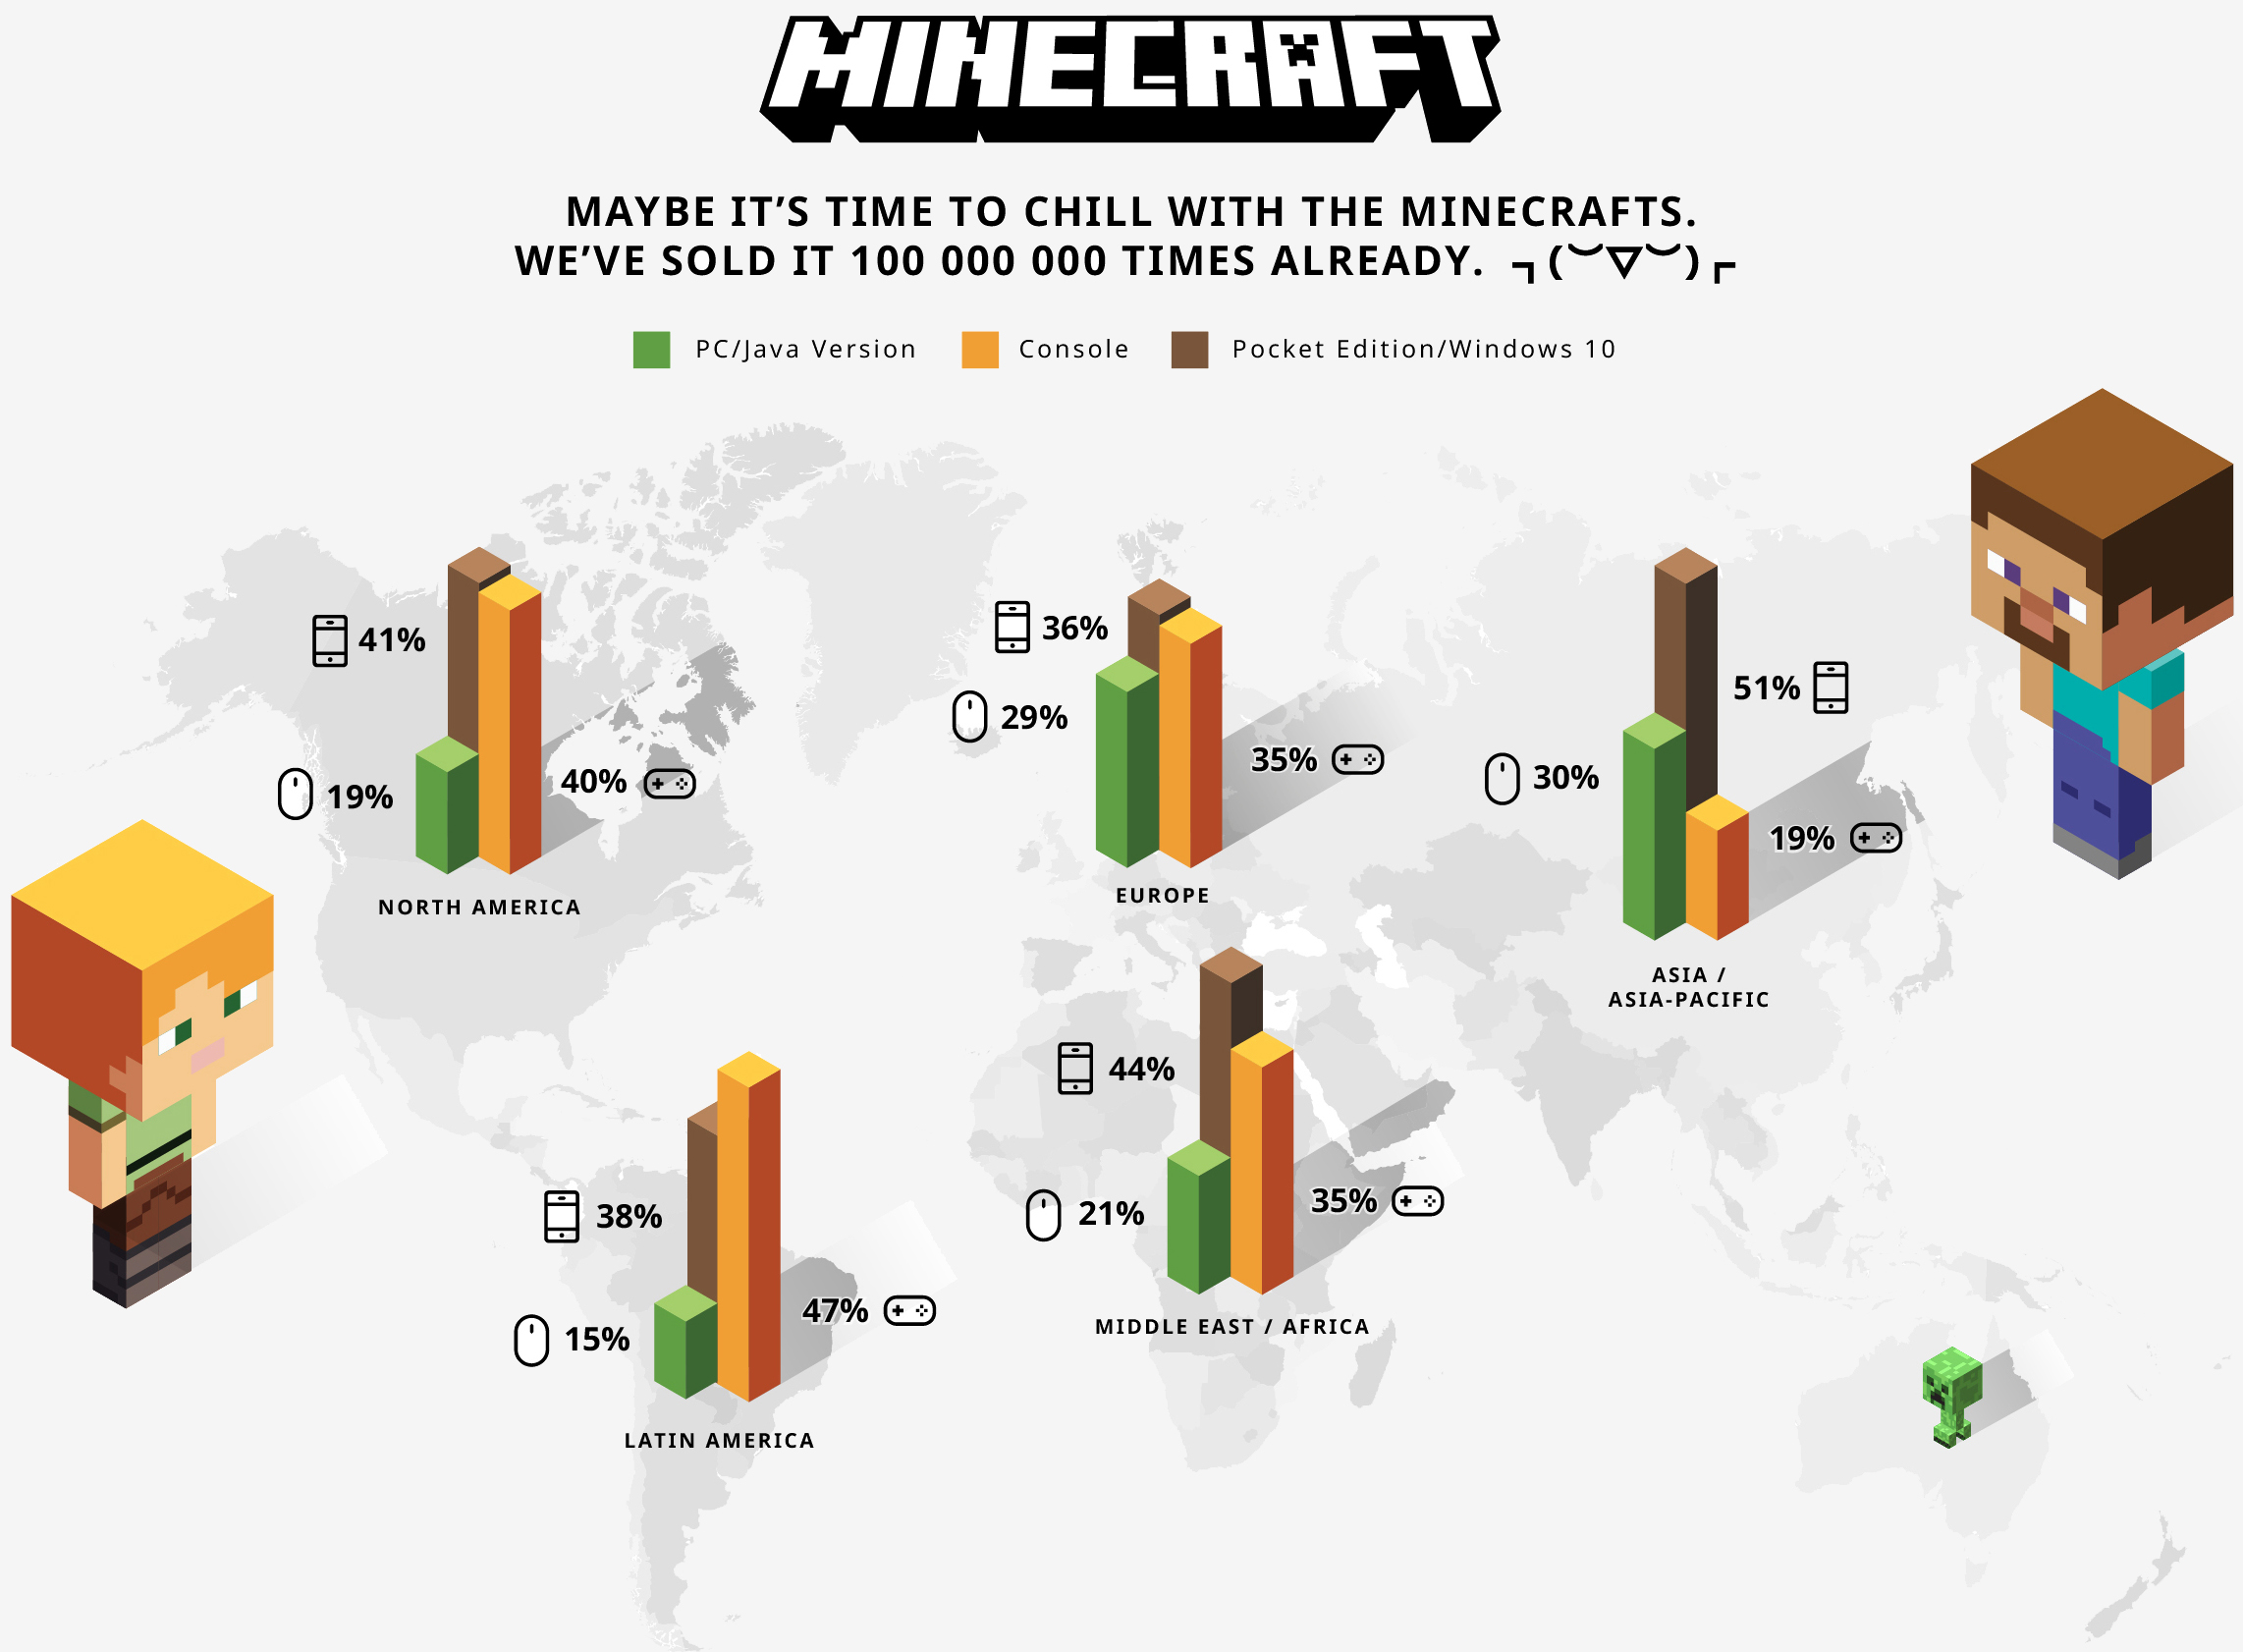 Microsoft has sold an average of 53,000 copies of Minecraft each day this year